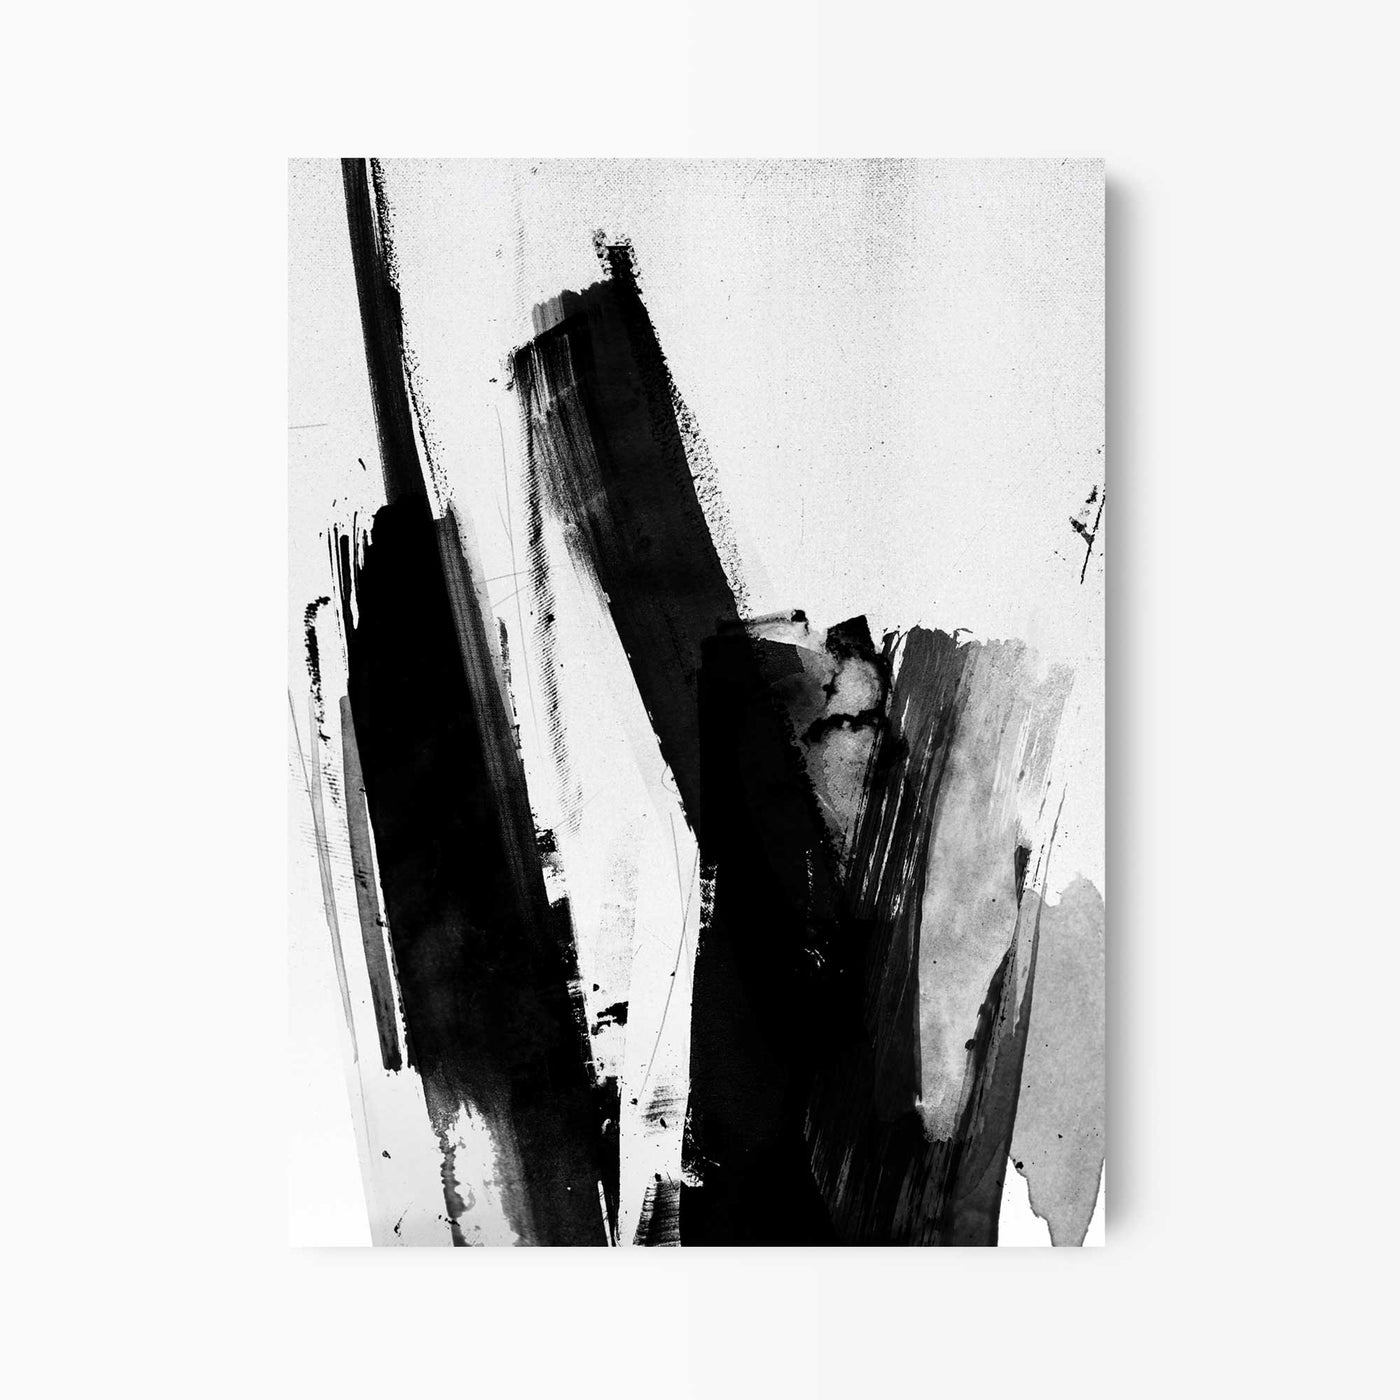 Green Lili 30x40cm / Unframed Black and White Abstract Scribble Painting 2